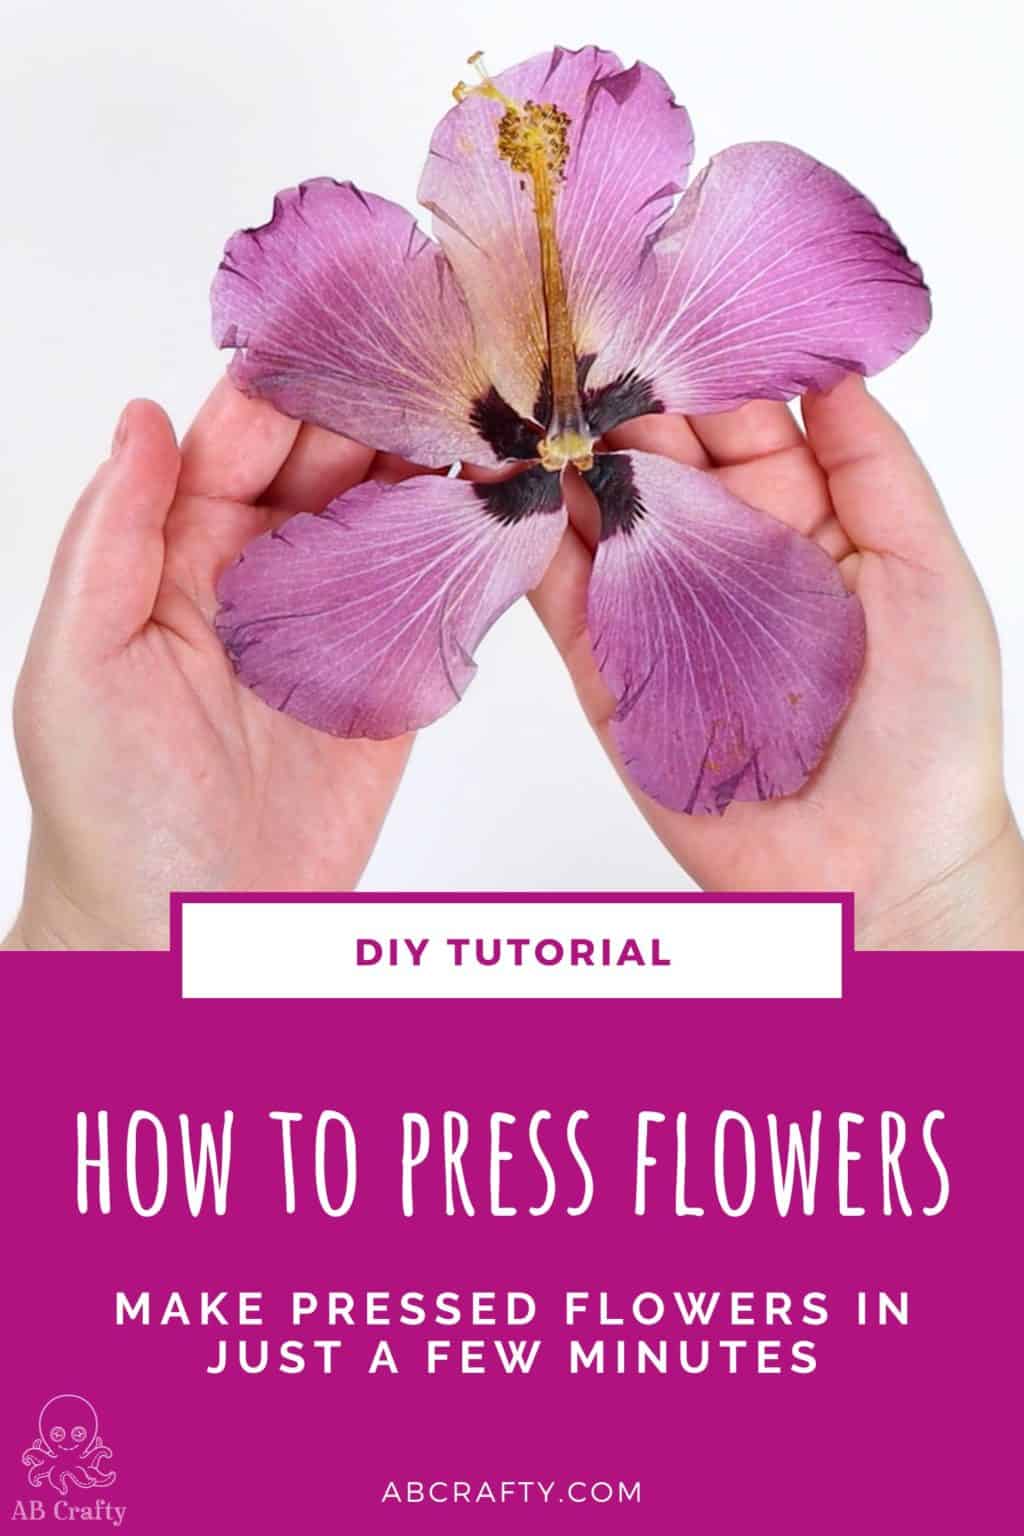 holding the finished pressed hibiscus flower with the title 'how to press flowers - make pressed flowers in just a few minutes, diy tutorial"